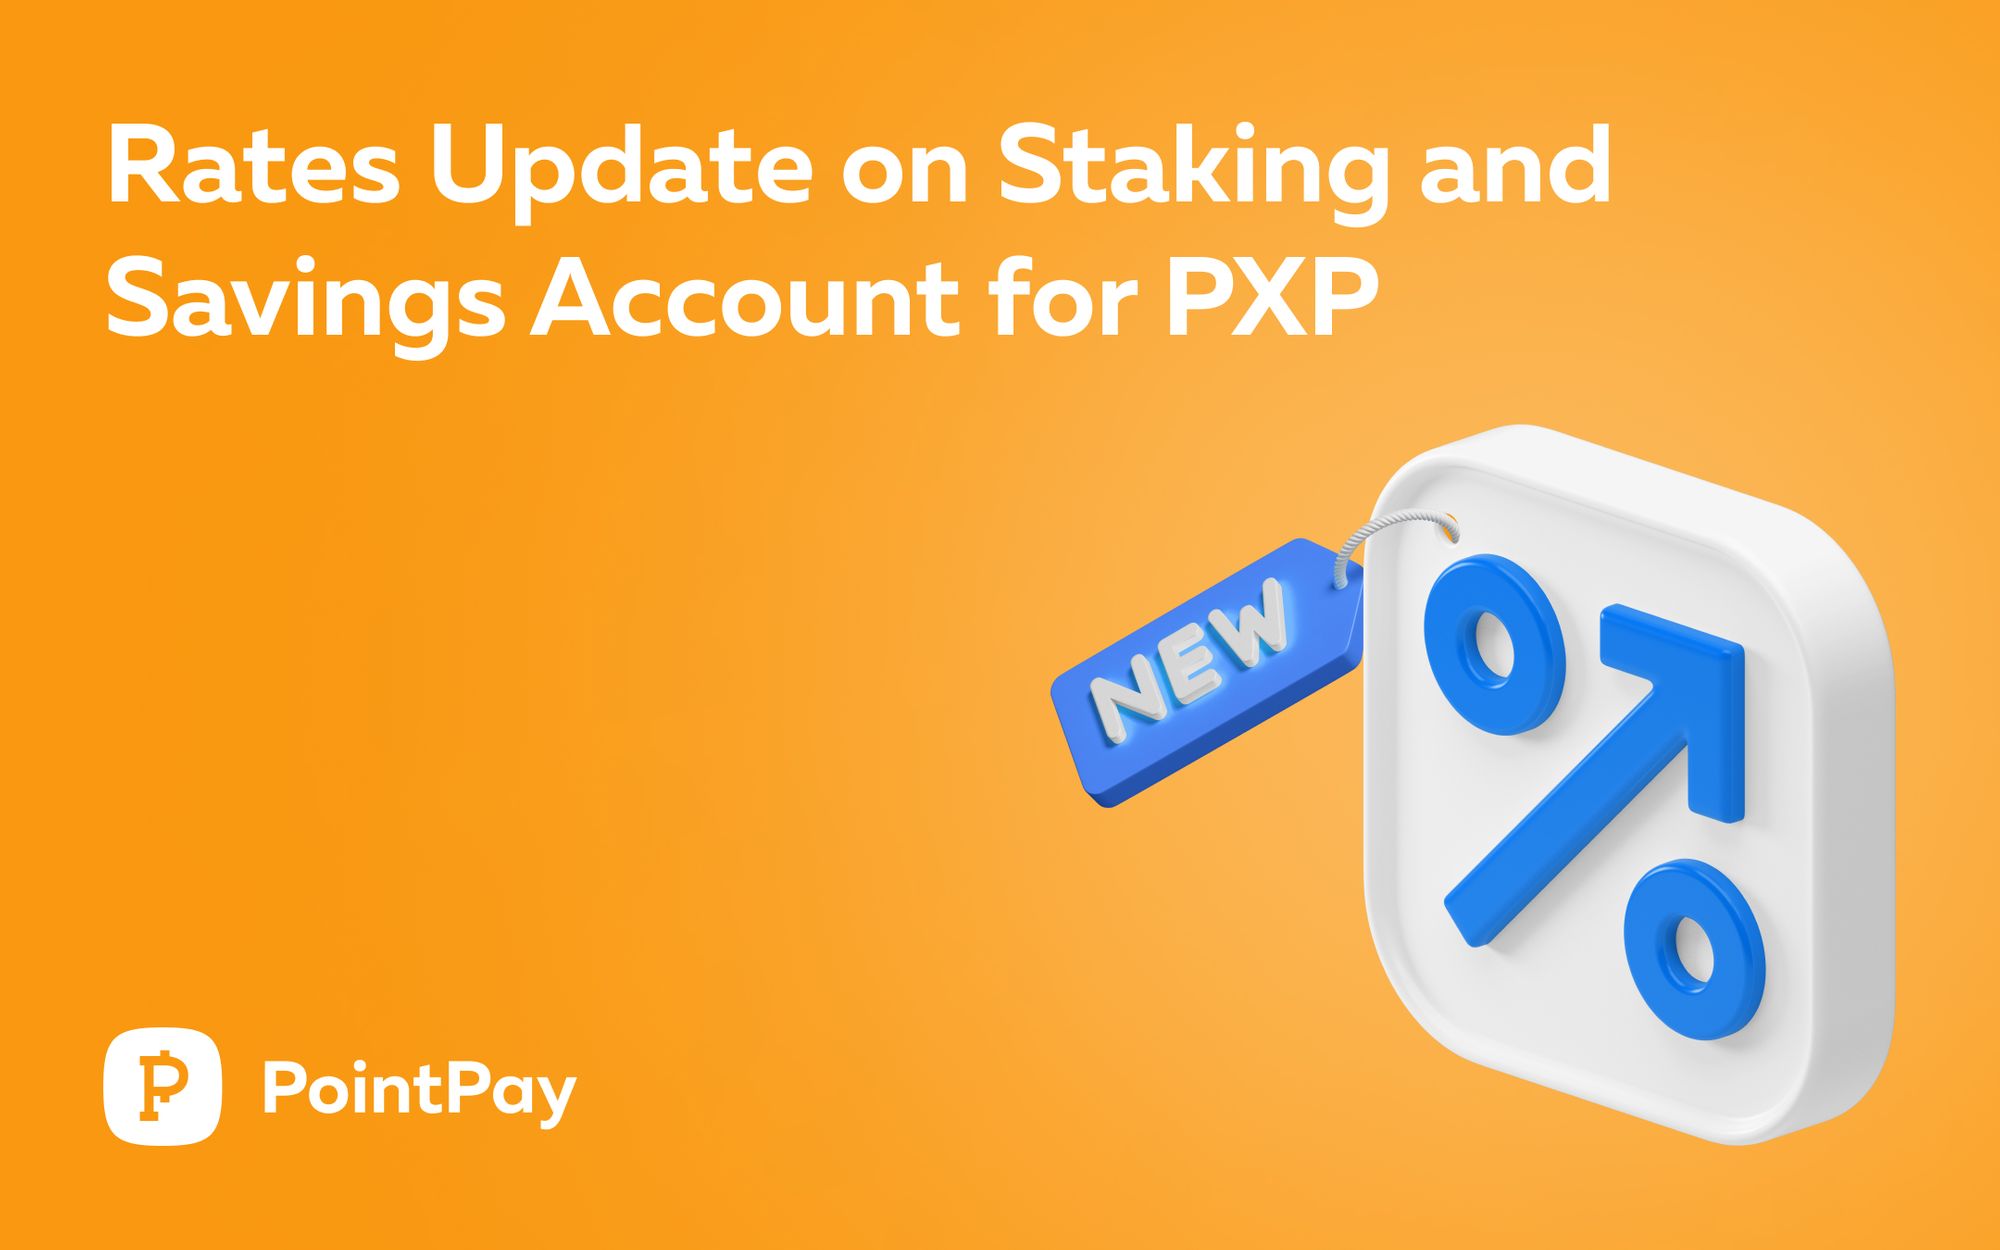 PointPay reduces APR on Staking and Savings accounts for PXP tokens